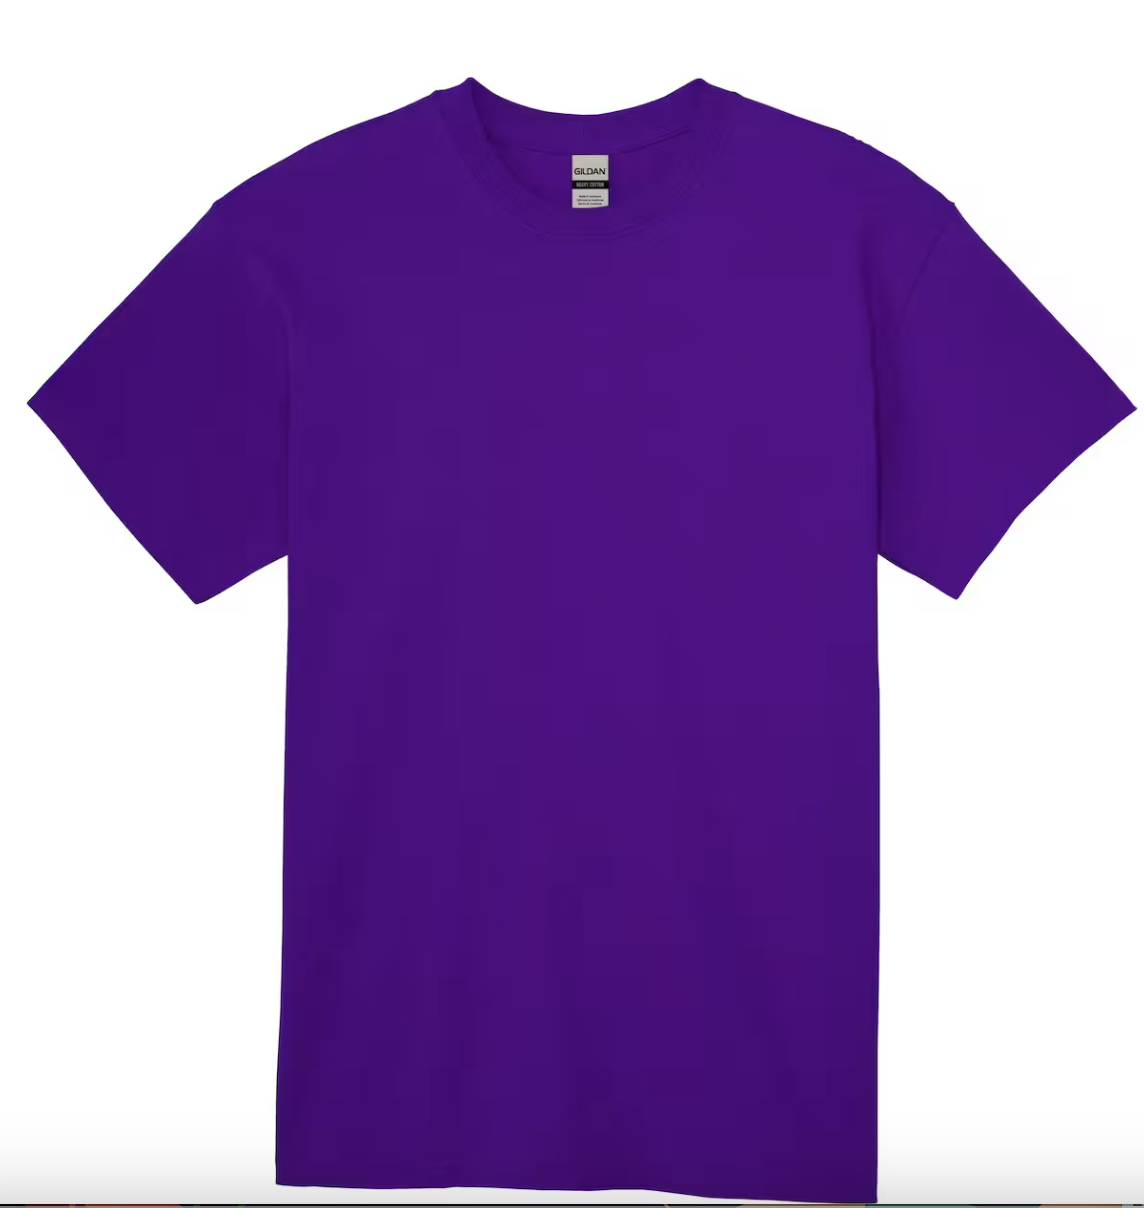 ❤️ Limited time **Purple** size LARGE $25.00 Short-Sleeve “Resting Chief Face” Crew Neck T-Shirt⭐️ Takes approx 2-5 days to ship from date of order.